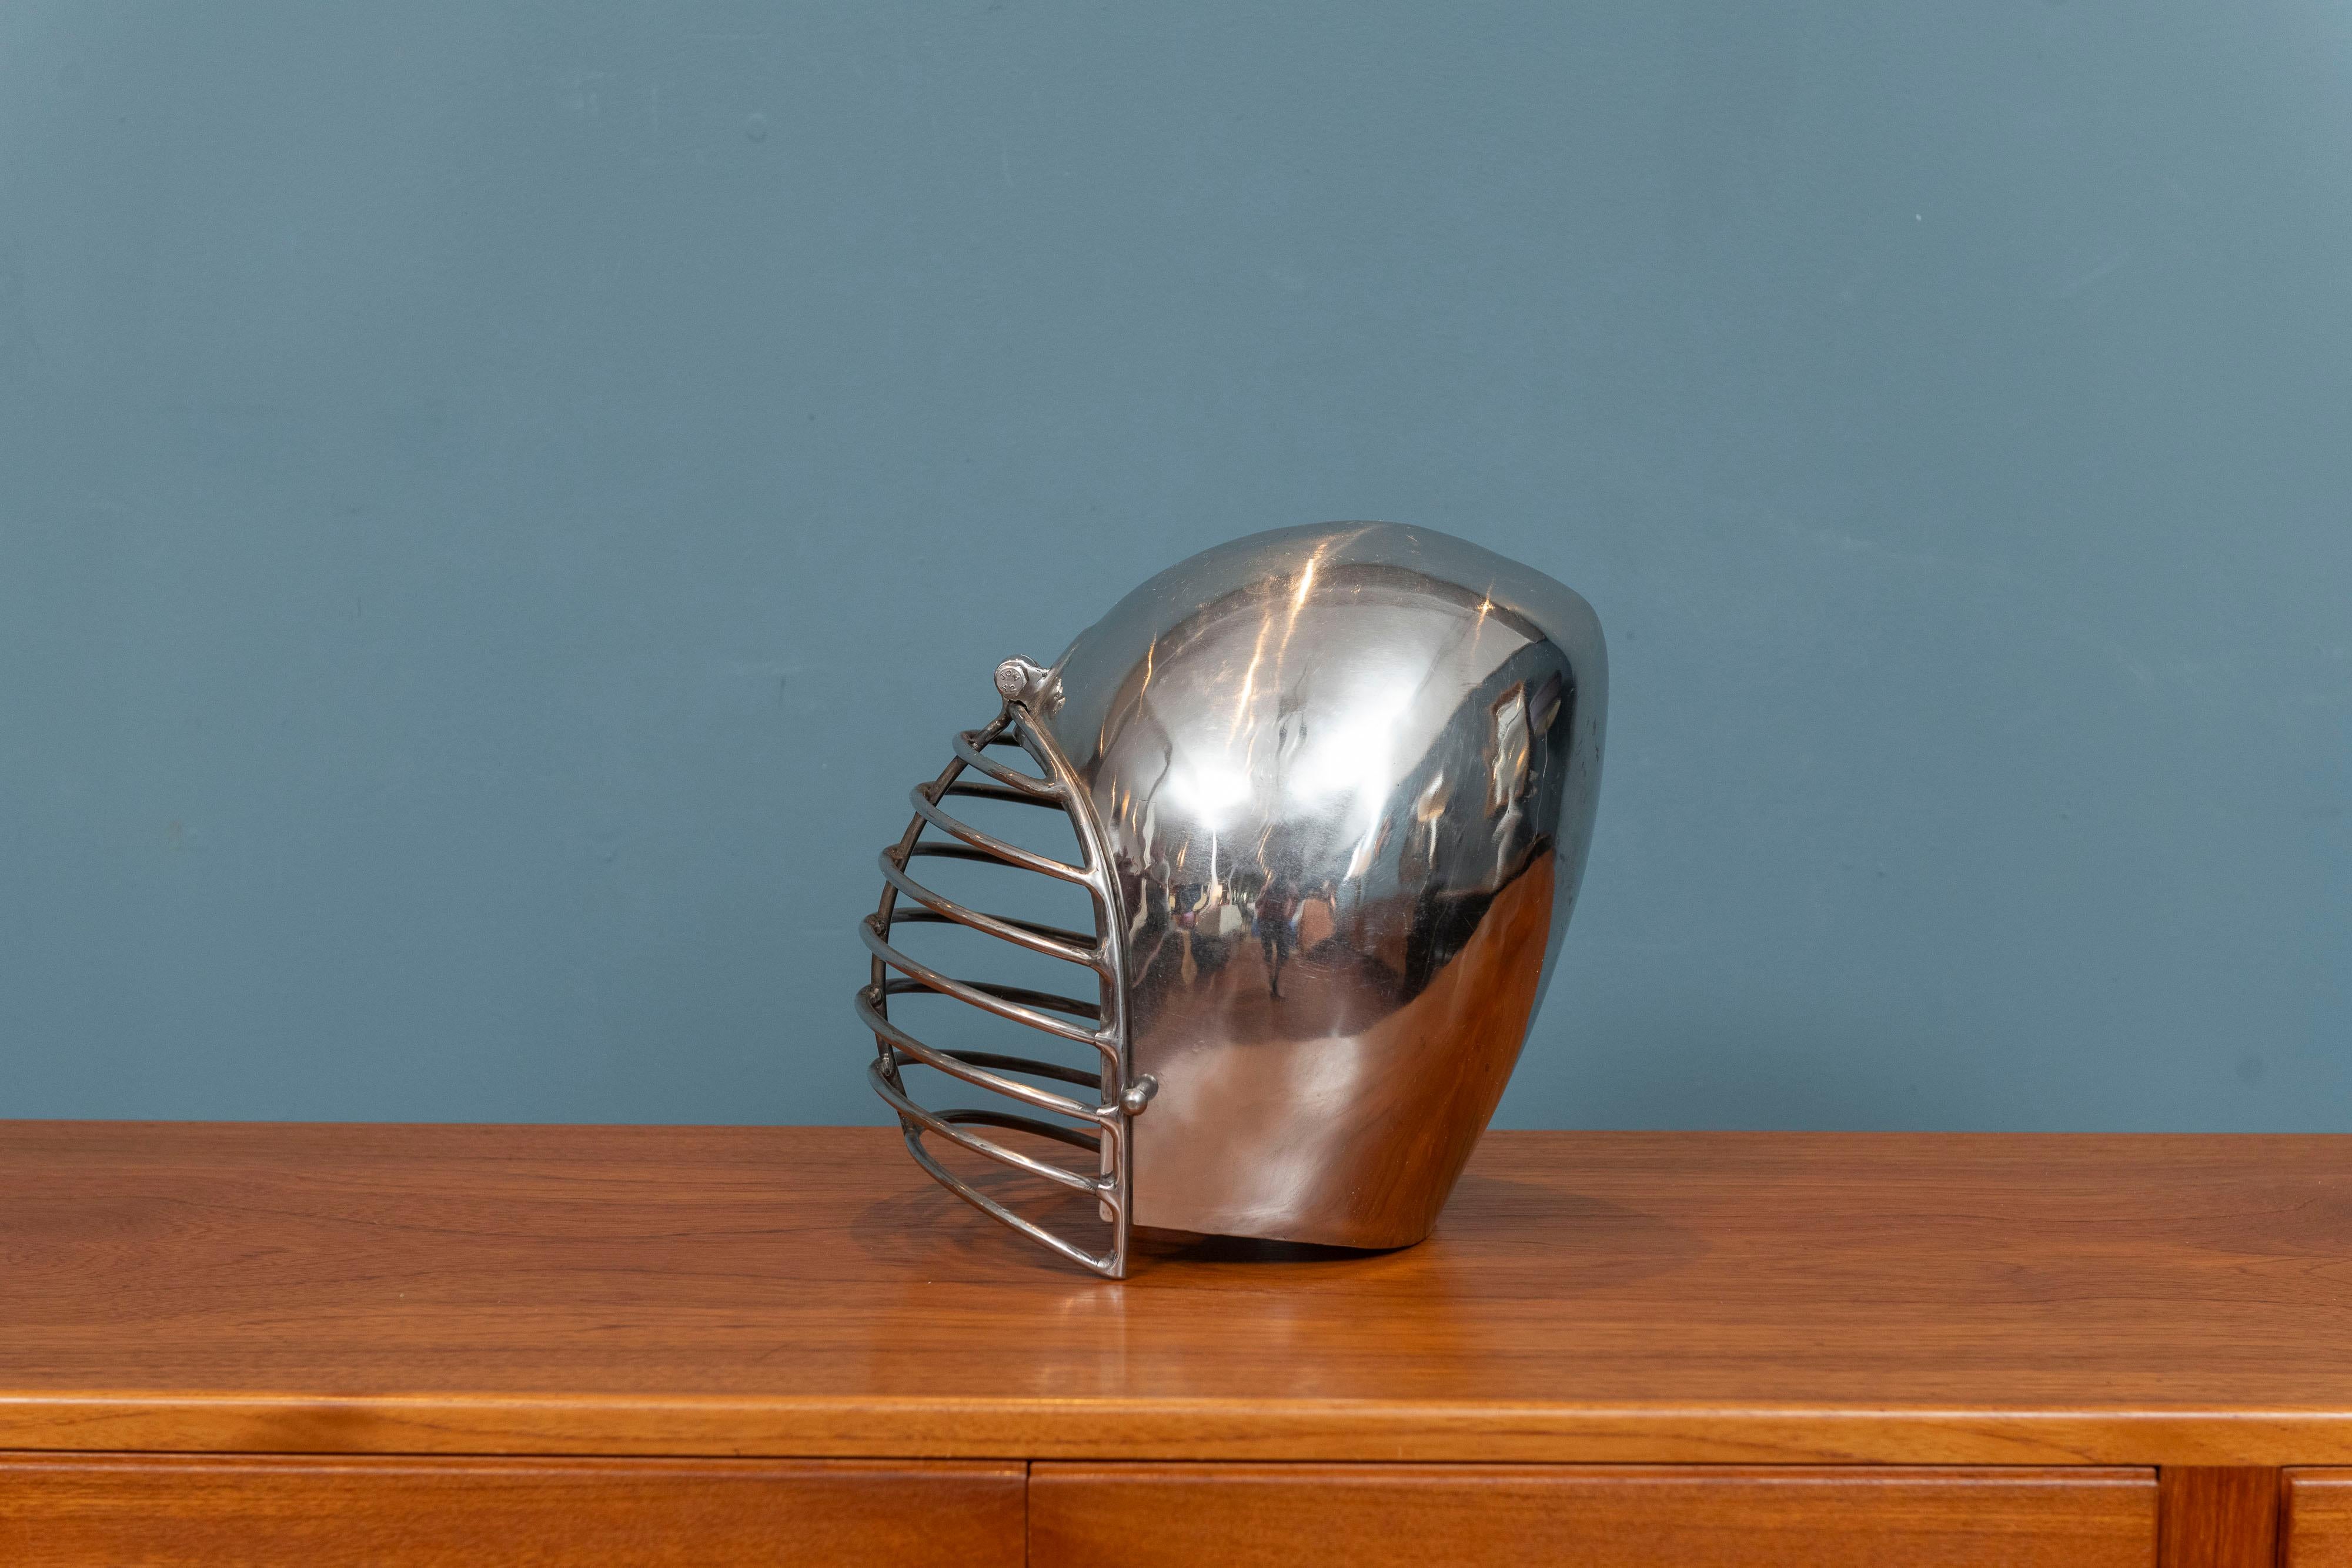 Decorative Roman Style polished metal helmet. Fun accessory for your office or man cave. Heavy solid construction steel helmet, a great addition to your home decor.